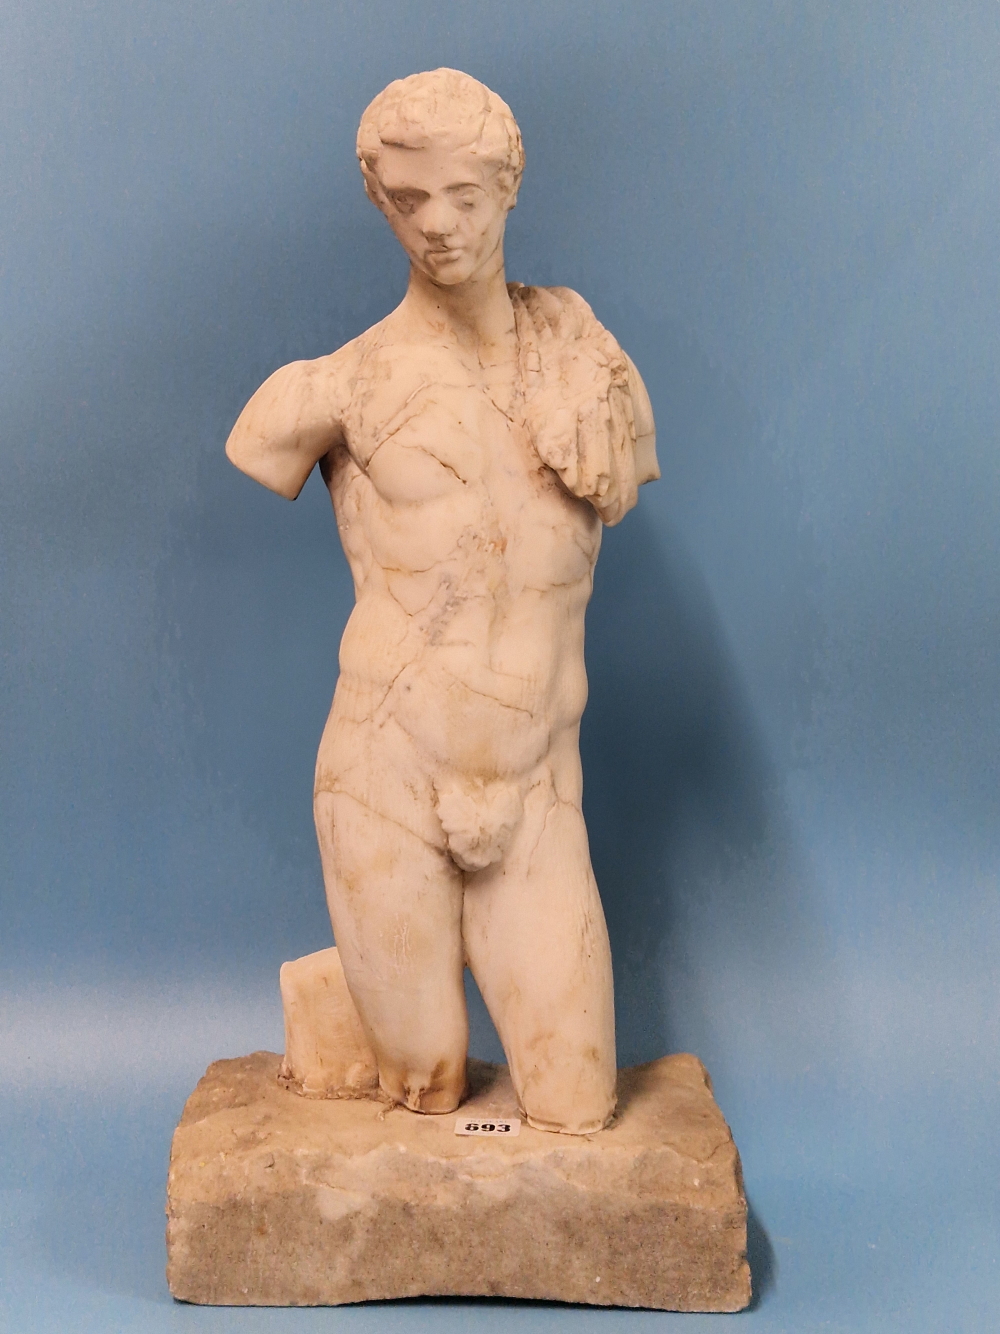 AN 18th C. WHITE MARBLE THREE QUARTER LENGTH SCULPTURE OF A CLASSICAL MAN STANDING WEARING A DRAPE - Image 2 of 5